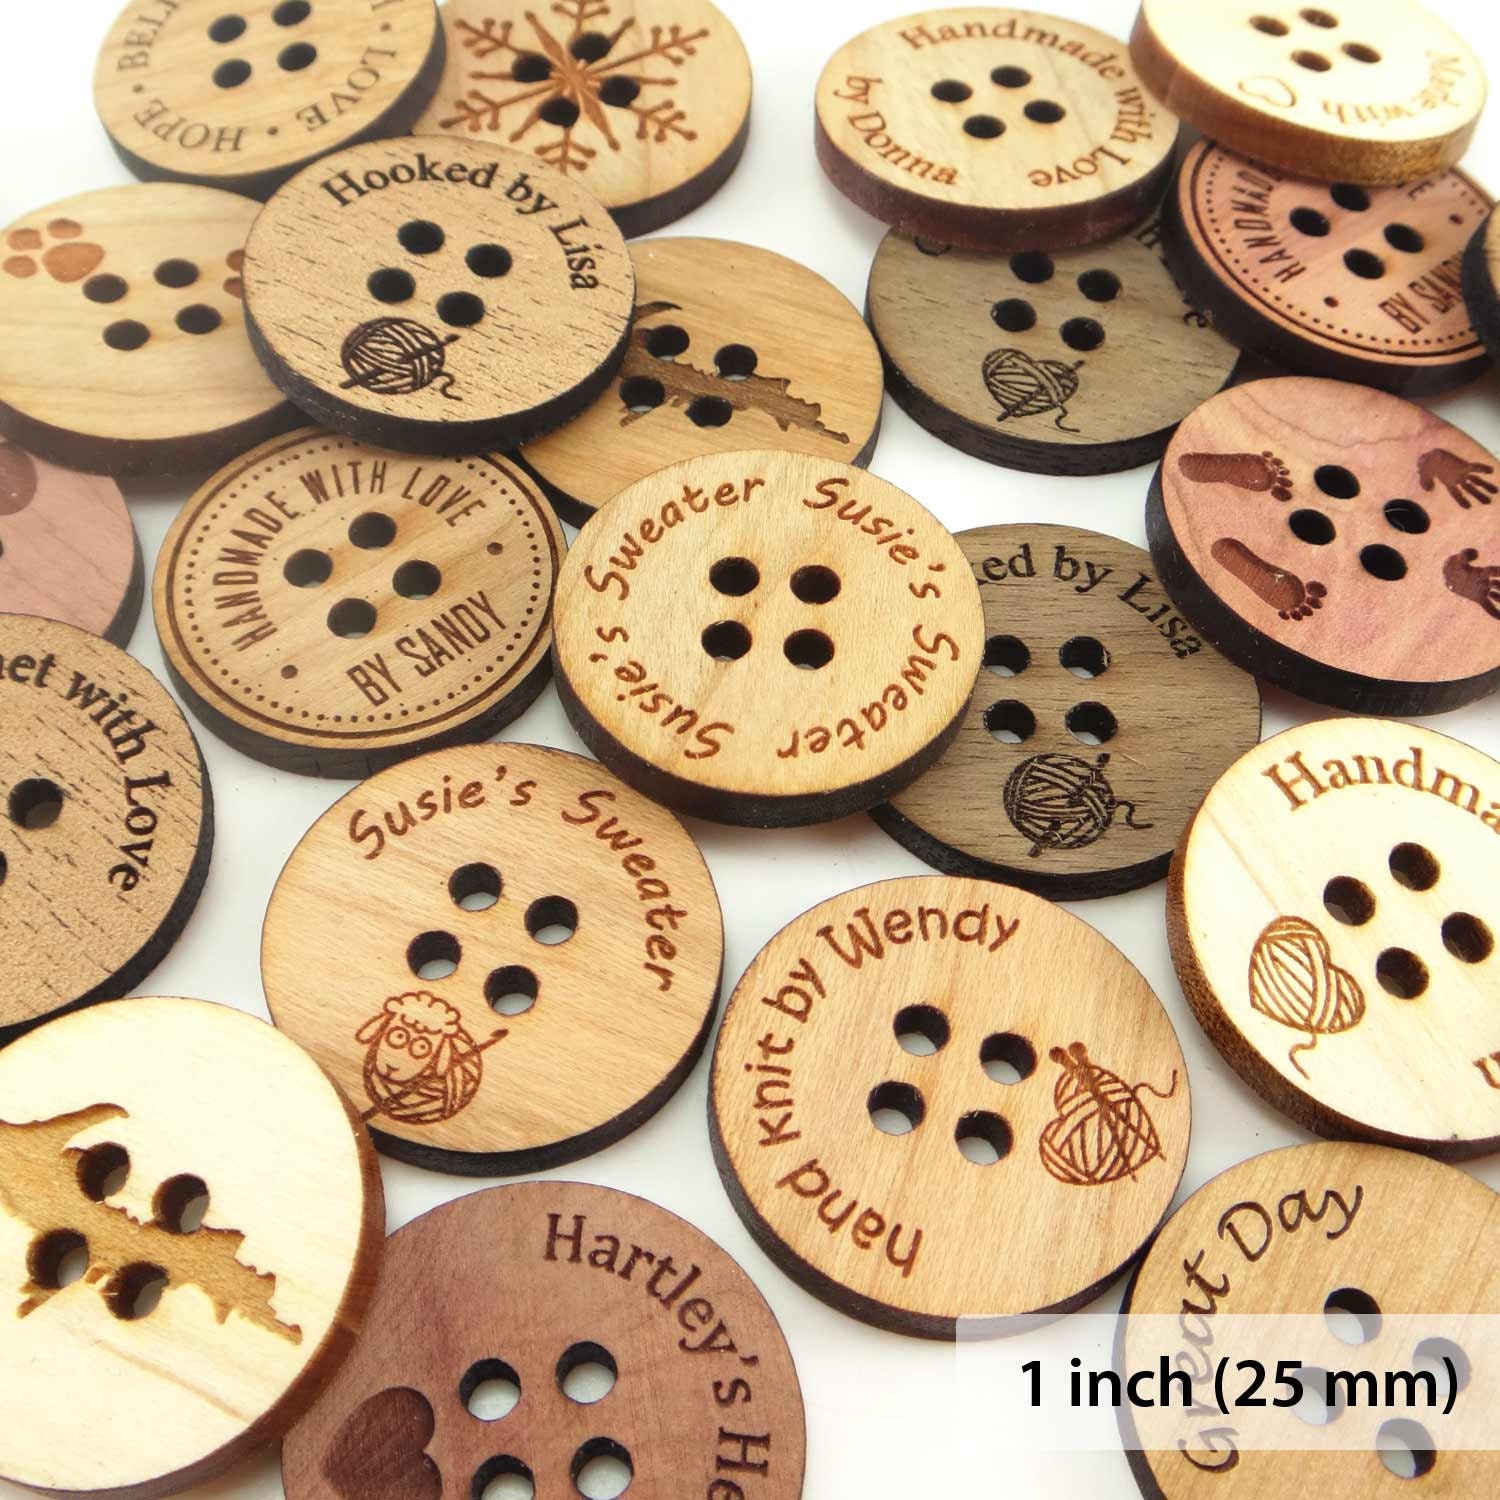 1 inch Wooden Buttons in Bulk Round Decorative Wood Buttons 4 Holes for Crafts Scrapbooking or Sewing and DIY Craft Pack 40 A664